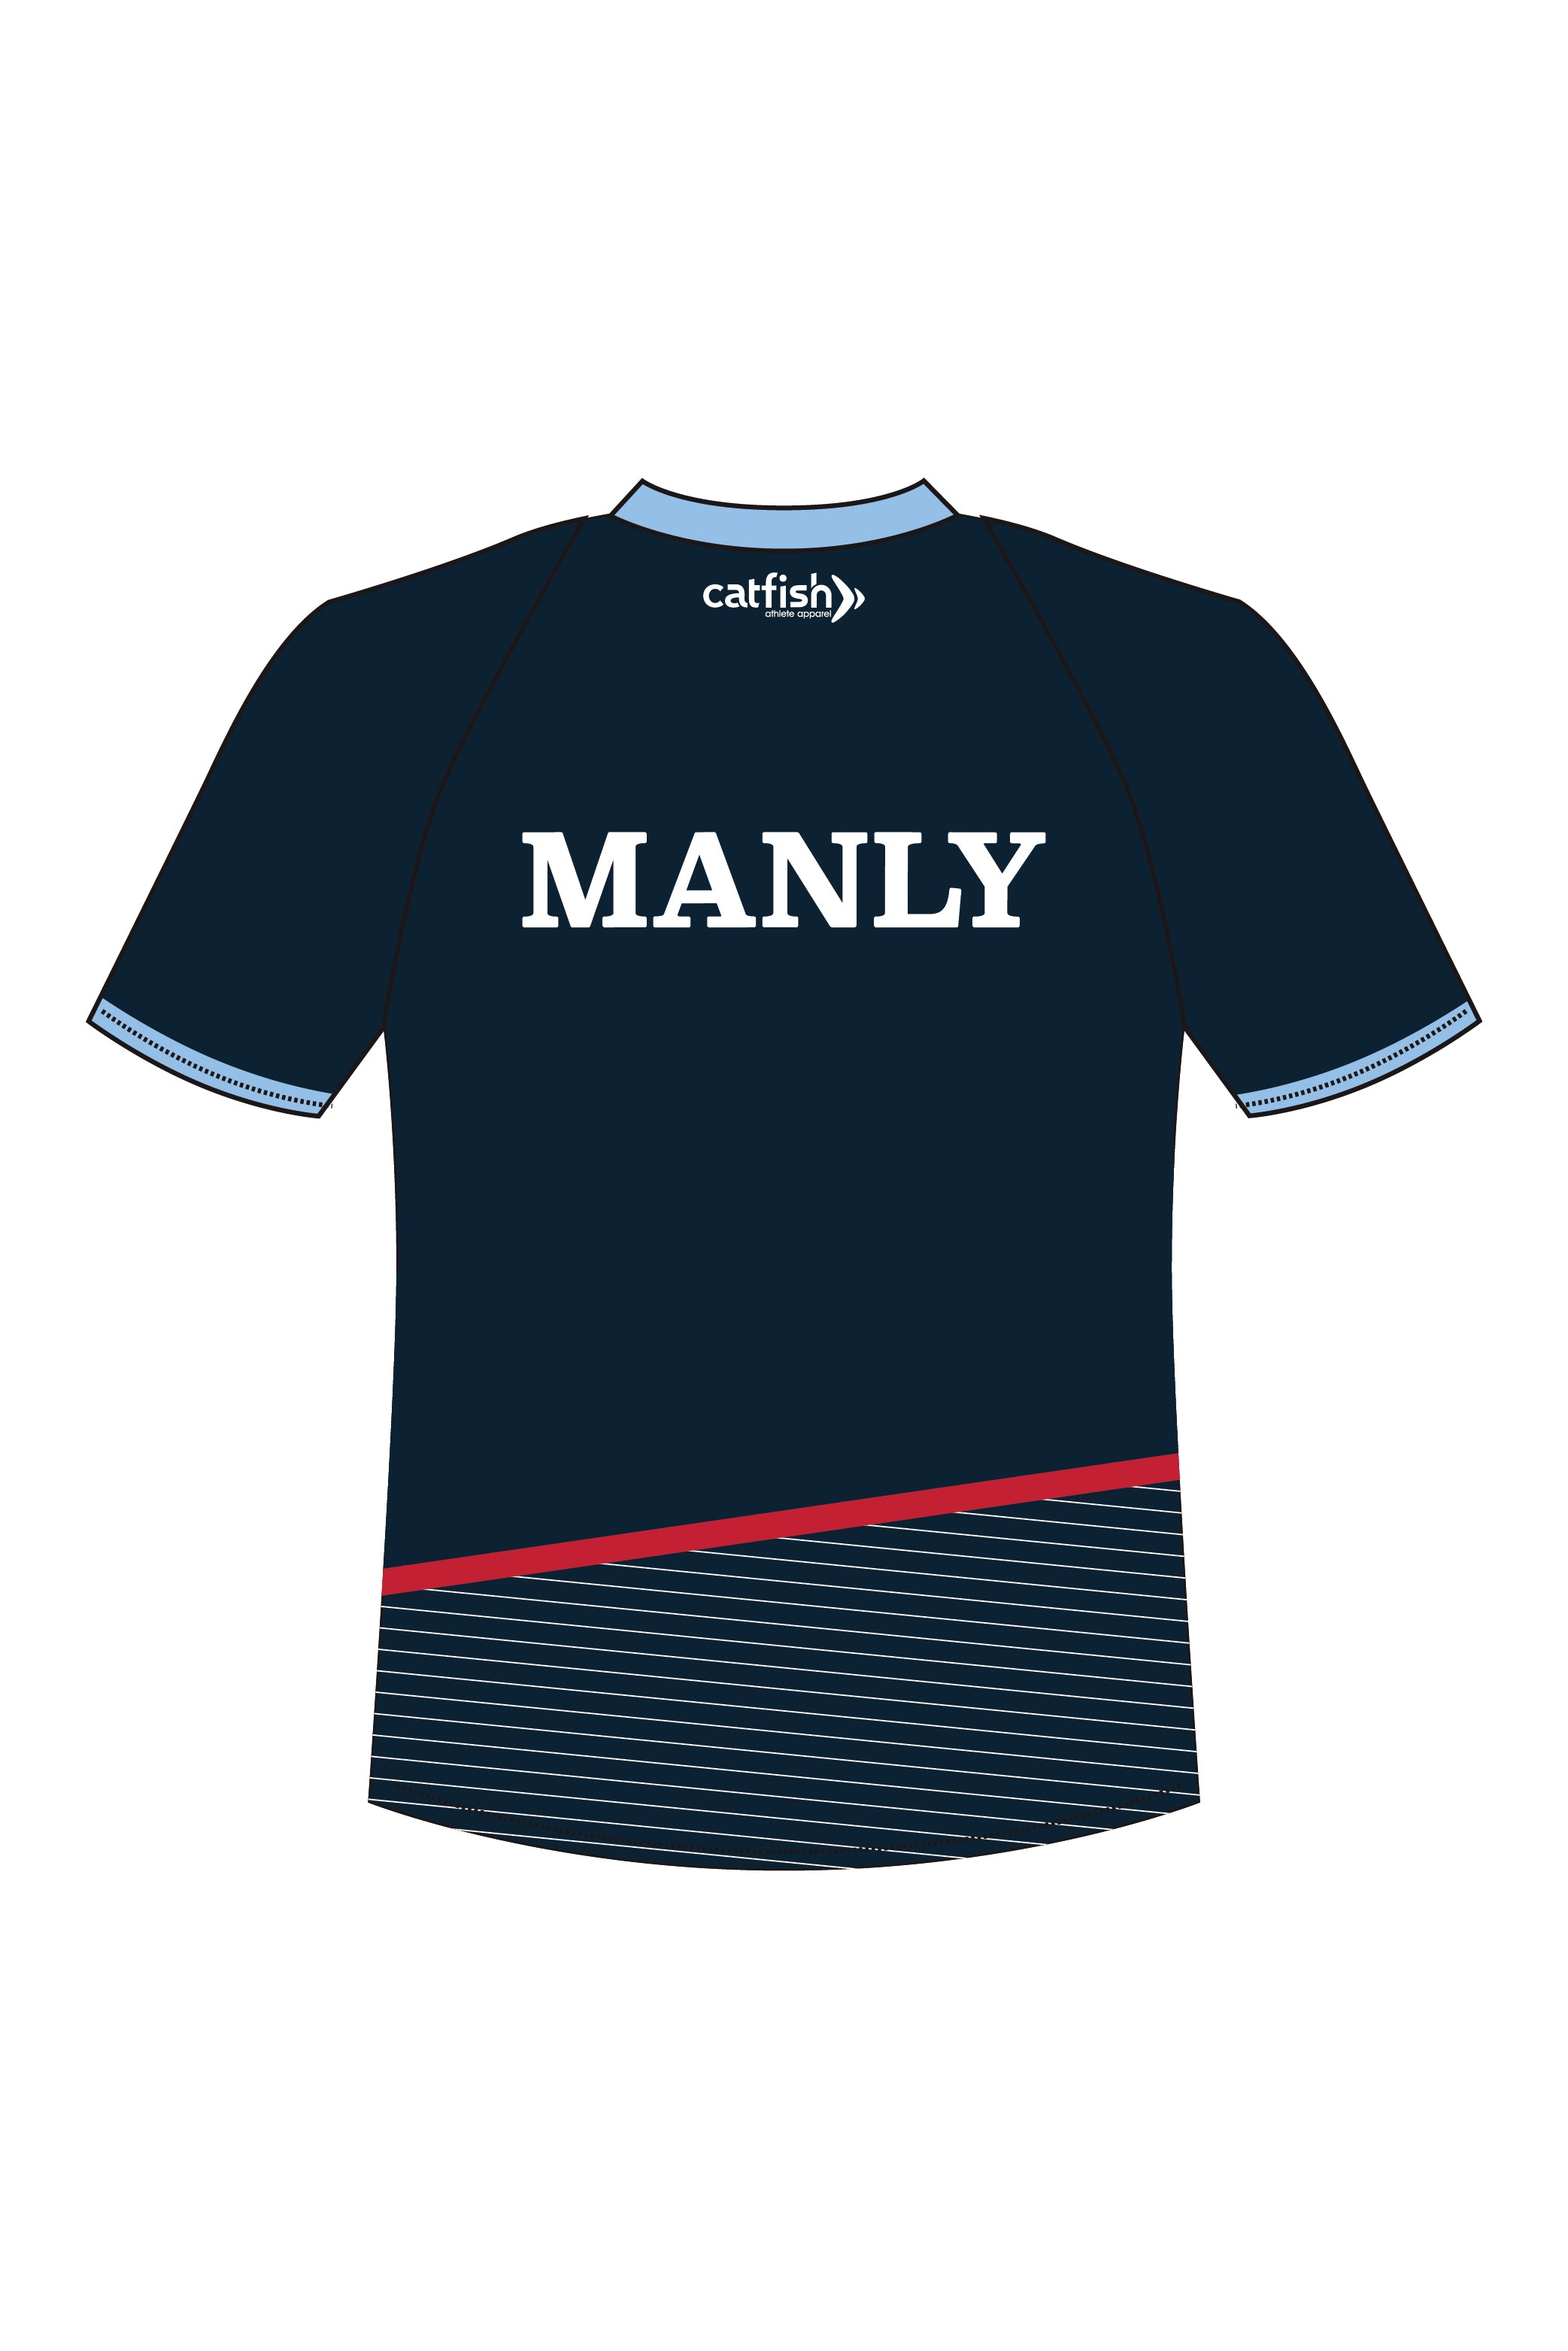 Manly Swimming Club Men's Sports Tee